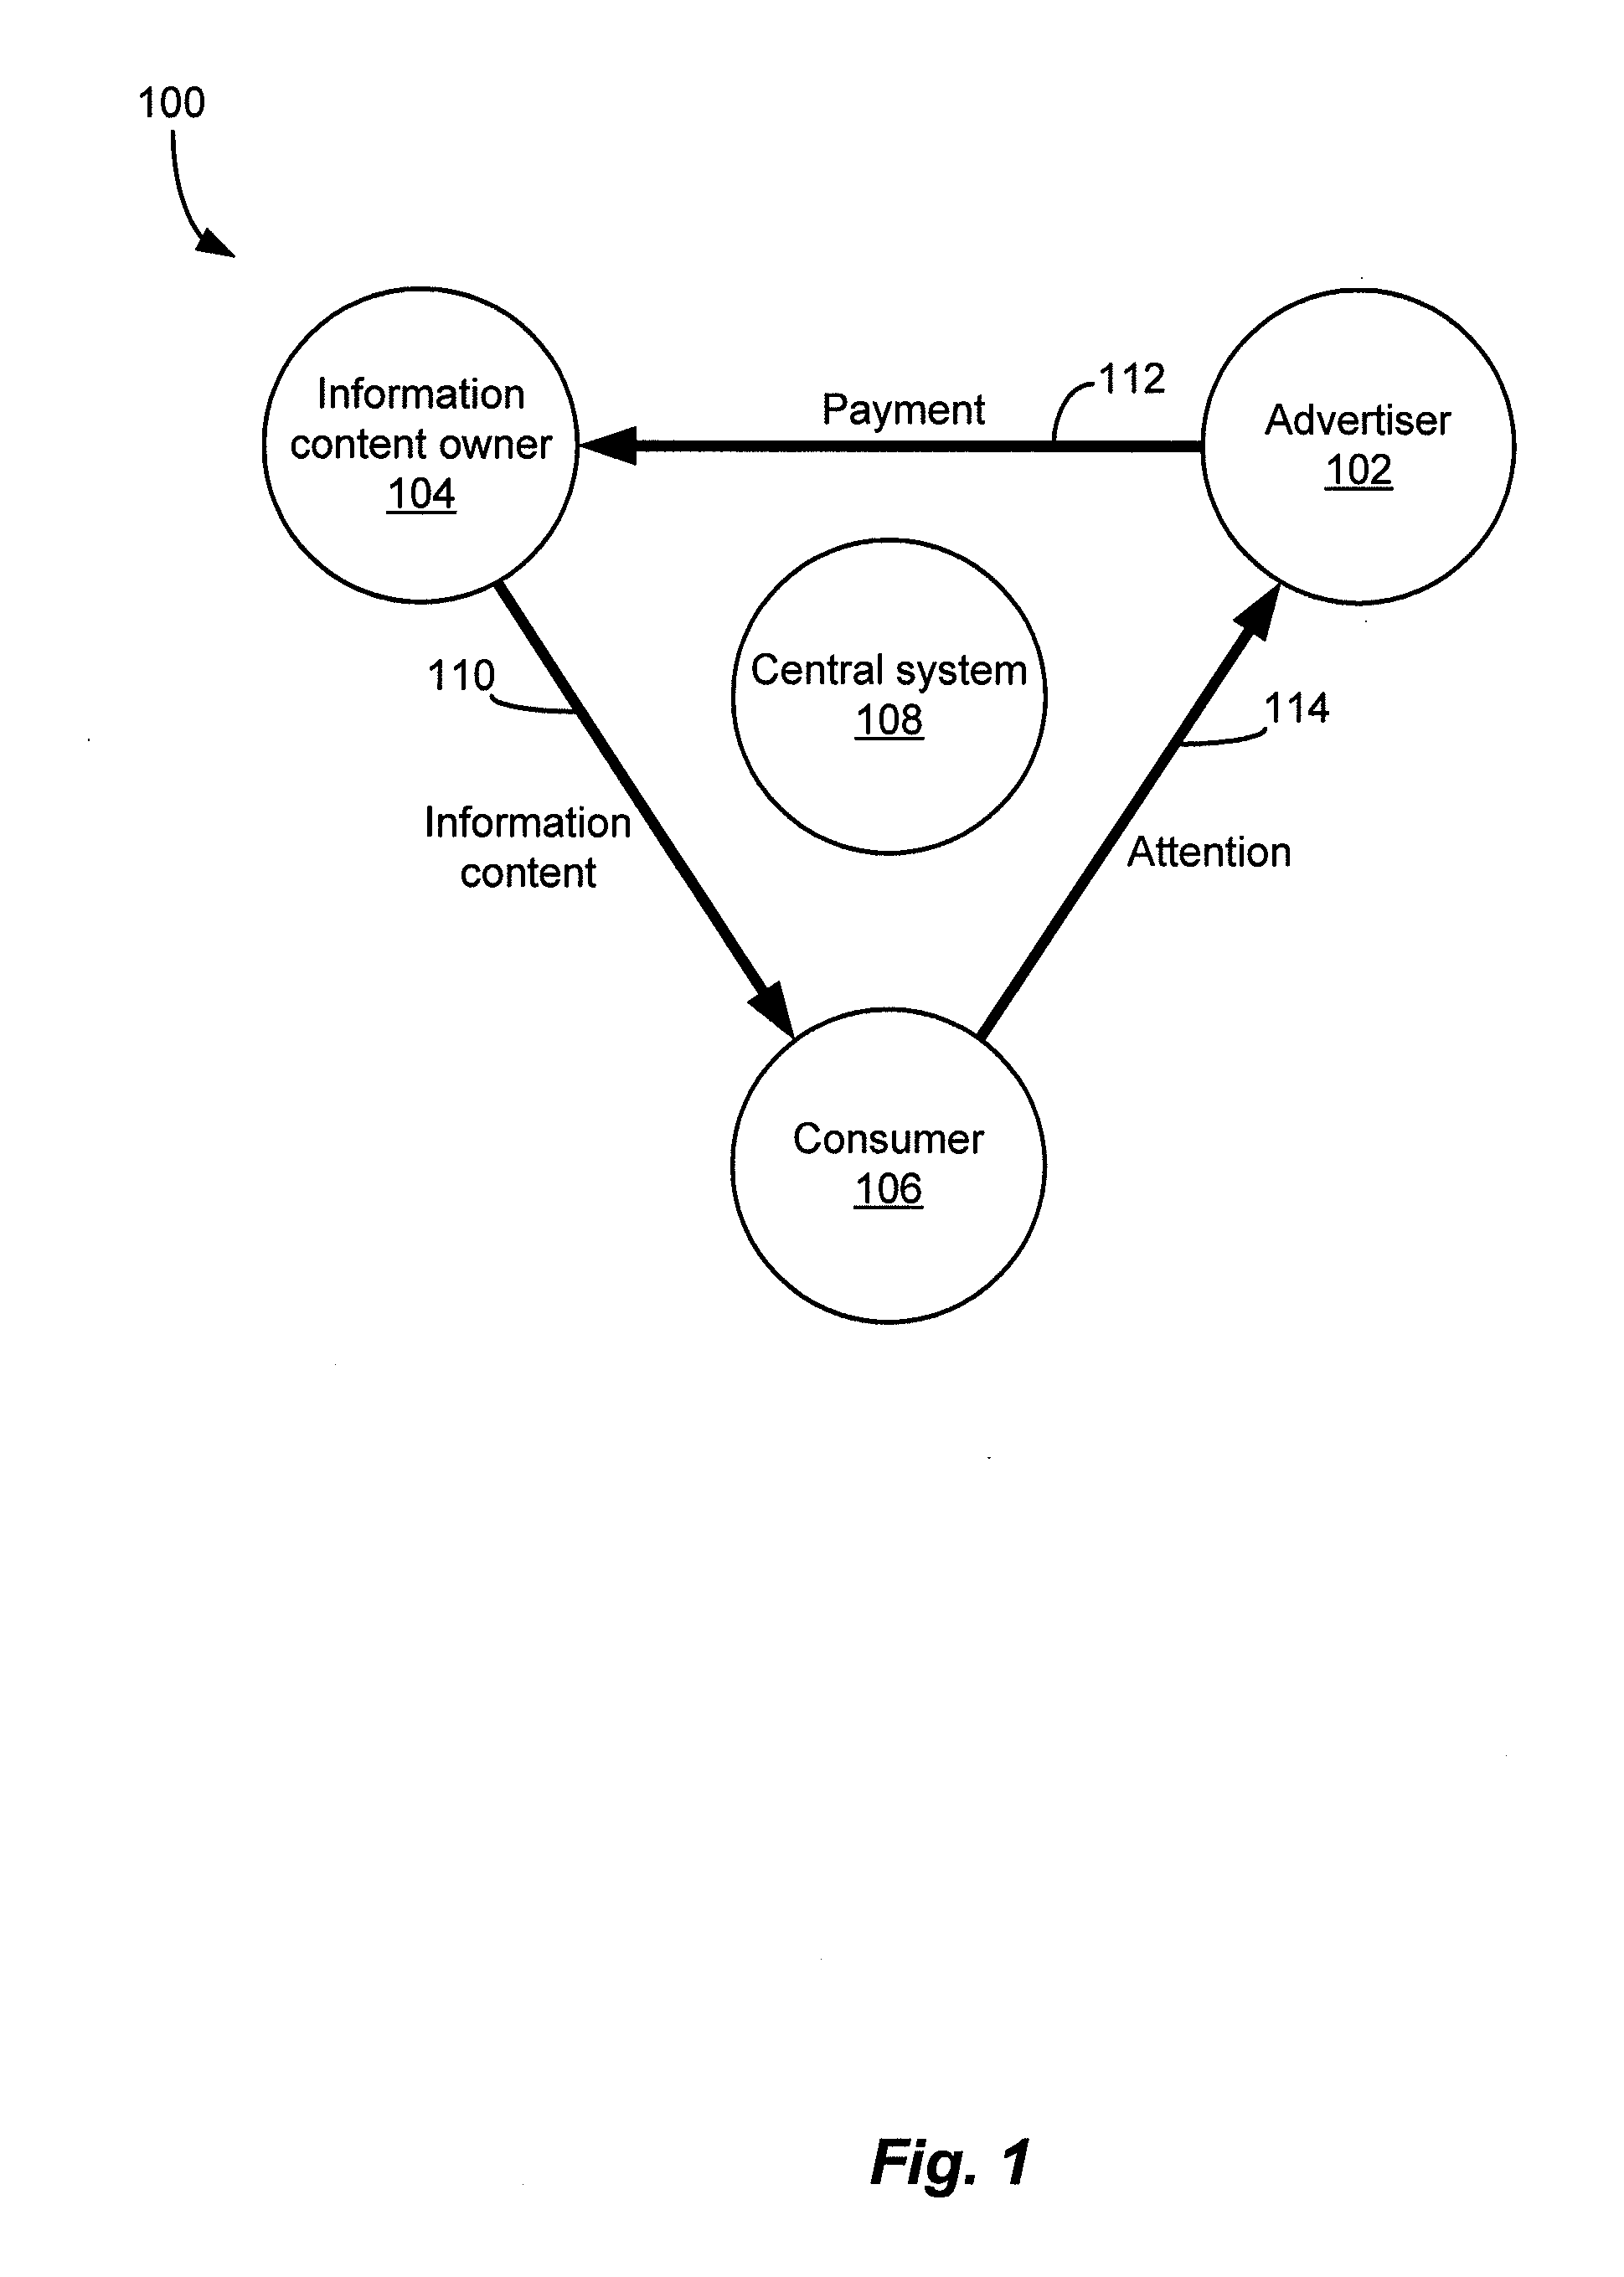 Method and system for processing on-line transactions involving a content owner, an advertiser, and a targeted consumer